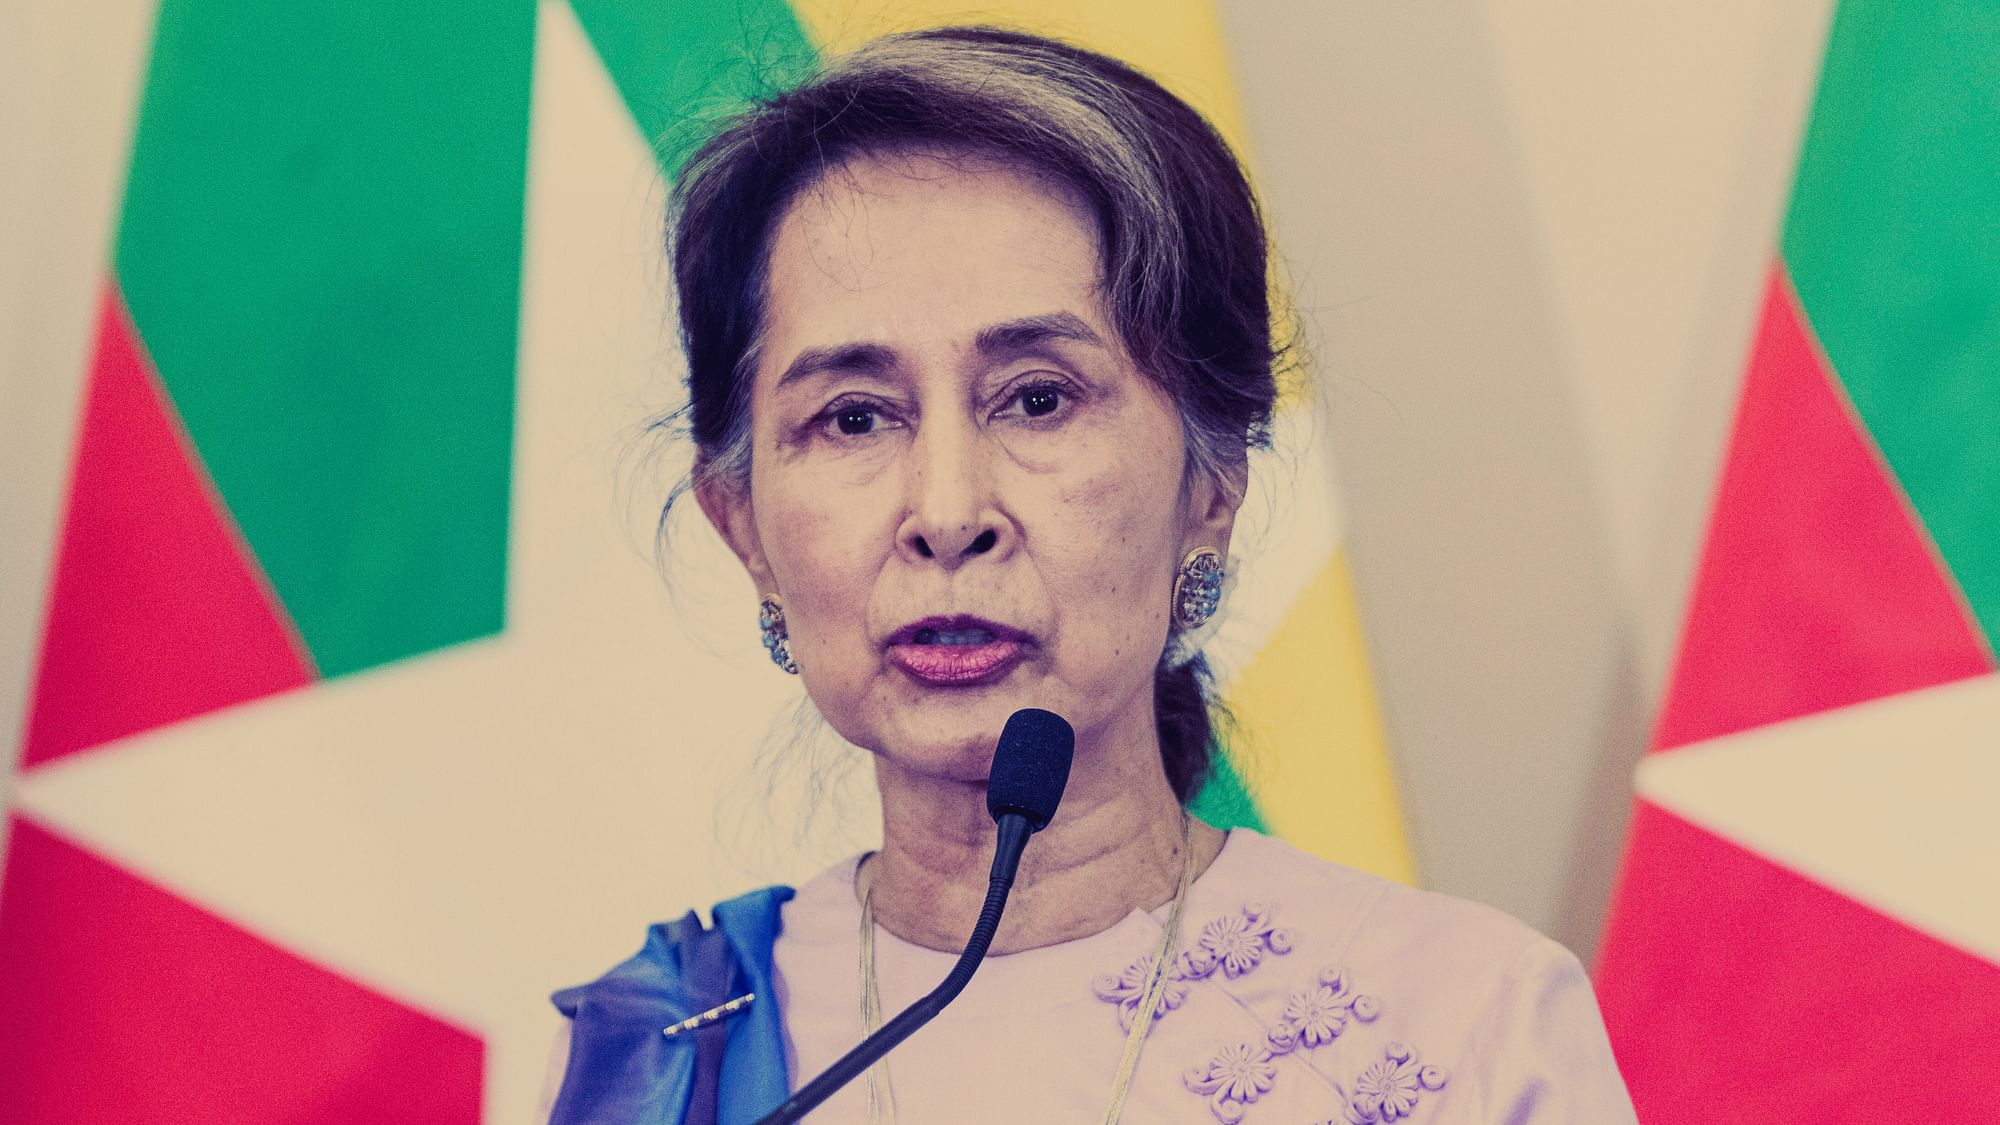 Image of Myanmar’s State Counsellor and iconic leader, Aung San Suu Kyi. Image used for representational purposes.